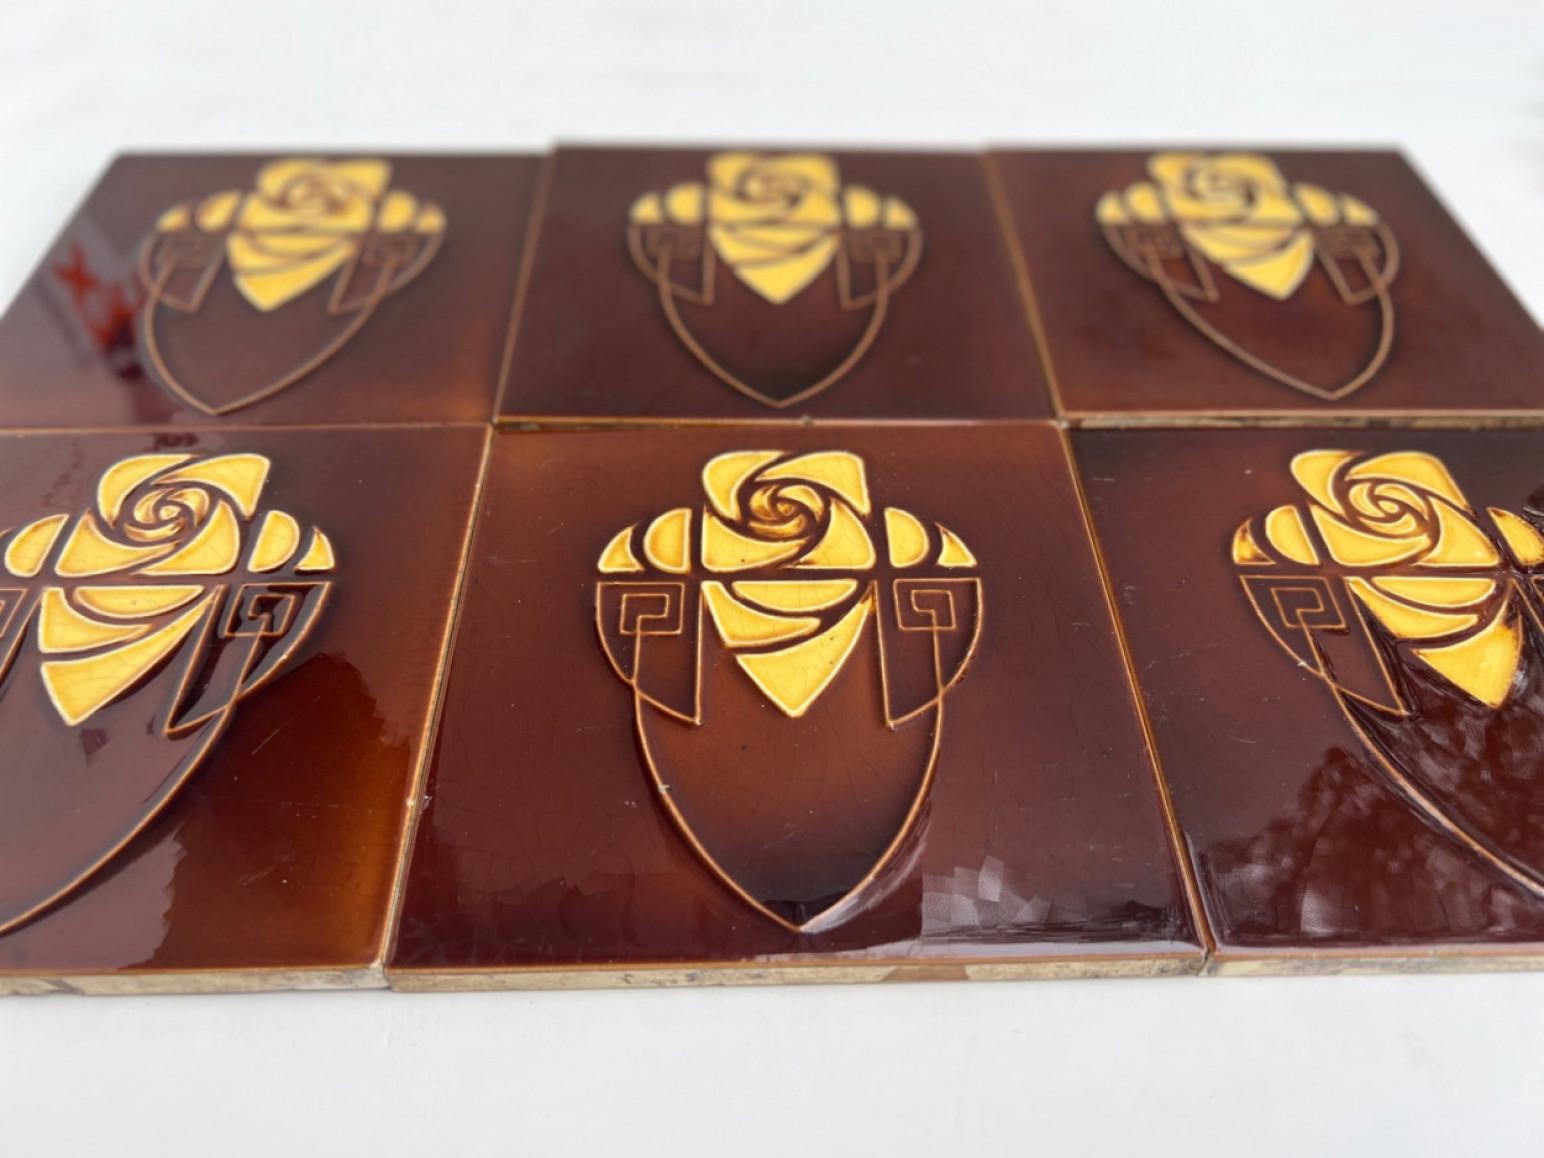 Ceramic Brown and Yellow Art Nouveau Glazed Relief Tiles by Gilliot, Hemiksem, circa 192 For Sale